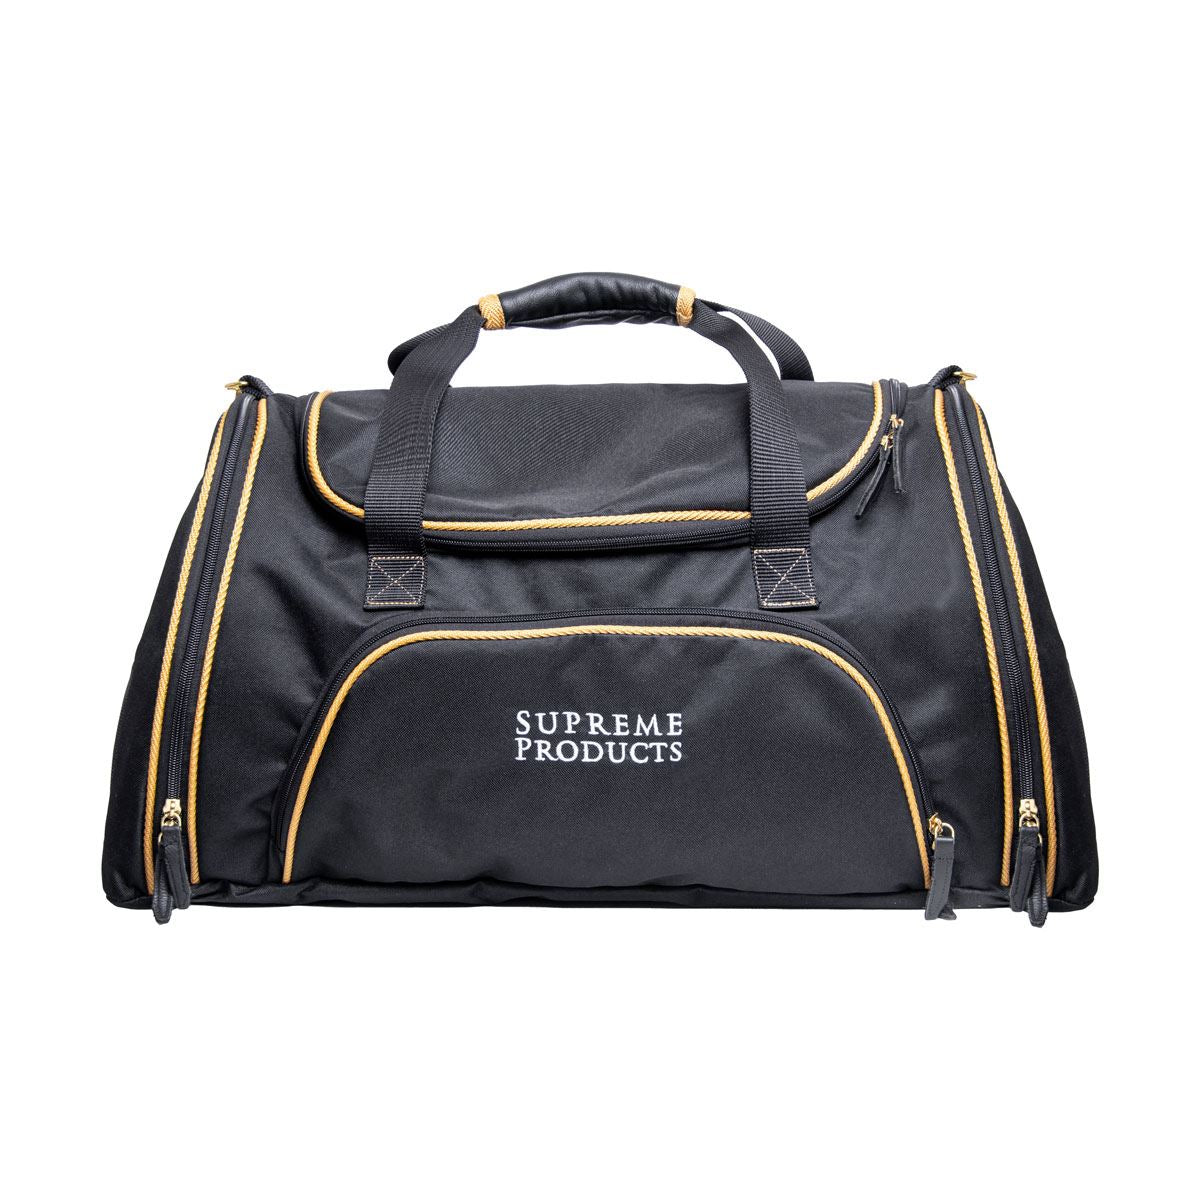 Supreme Products Pro Groom Show Kit Duffle Bag - Just Horse Riders